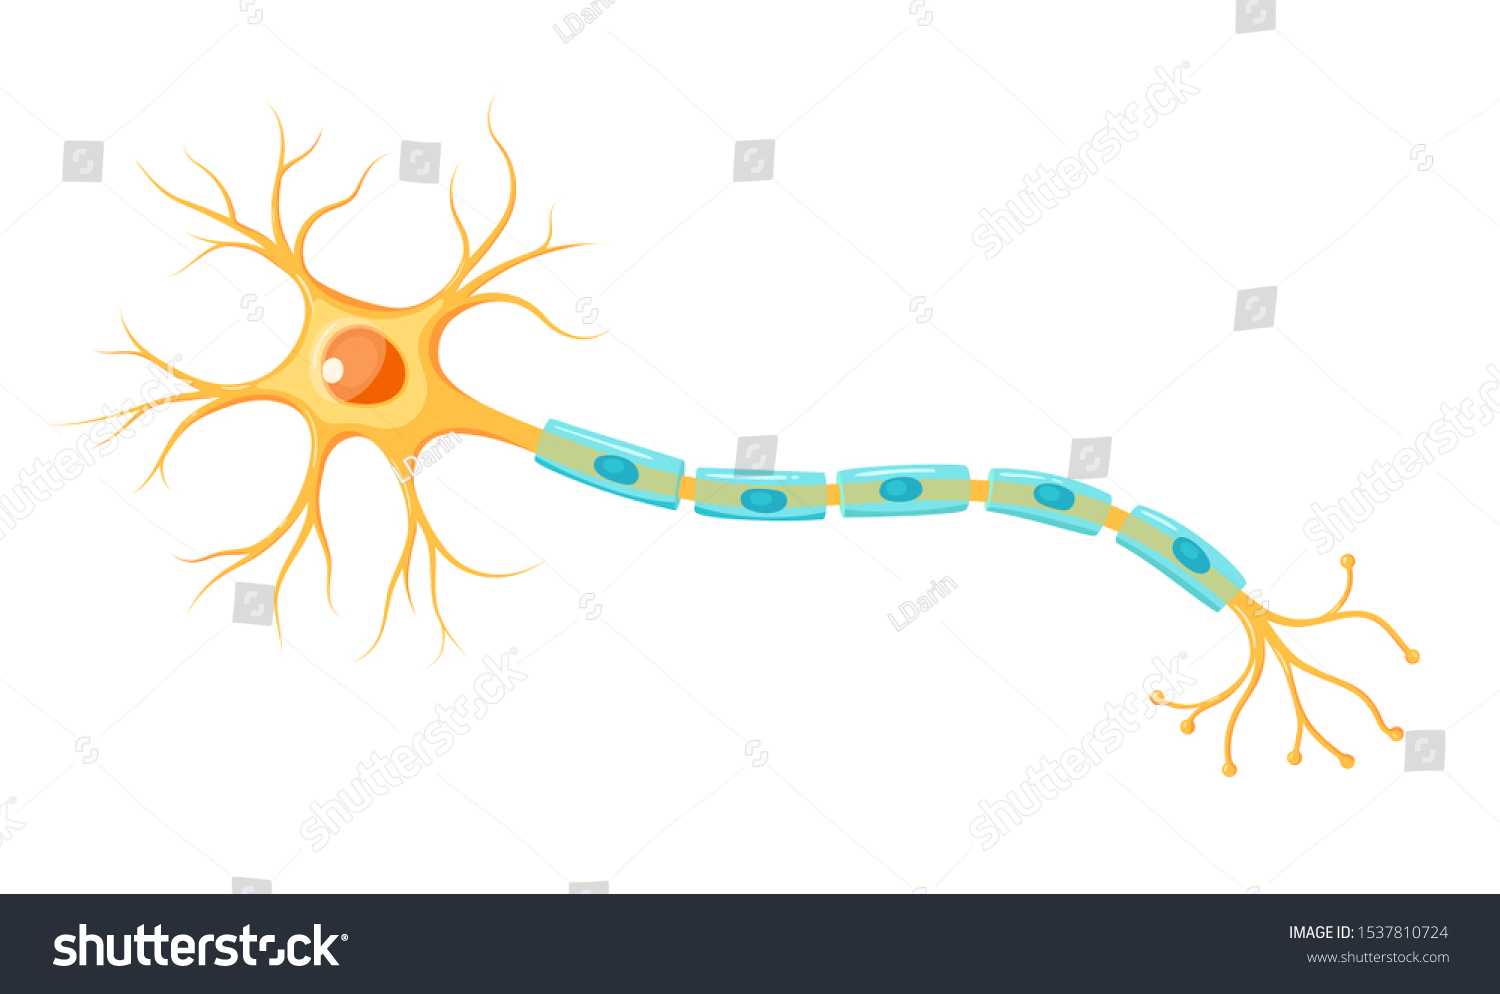 SVG of Vector yellow neuron isolated on white background. Educational illustration svg